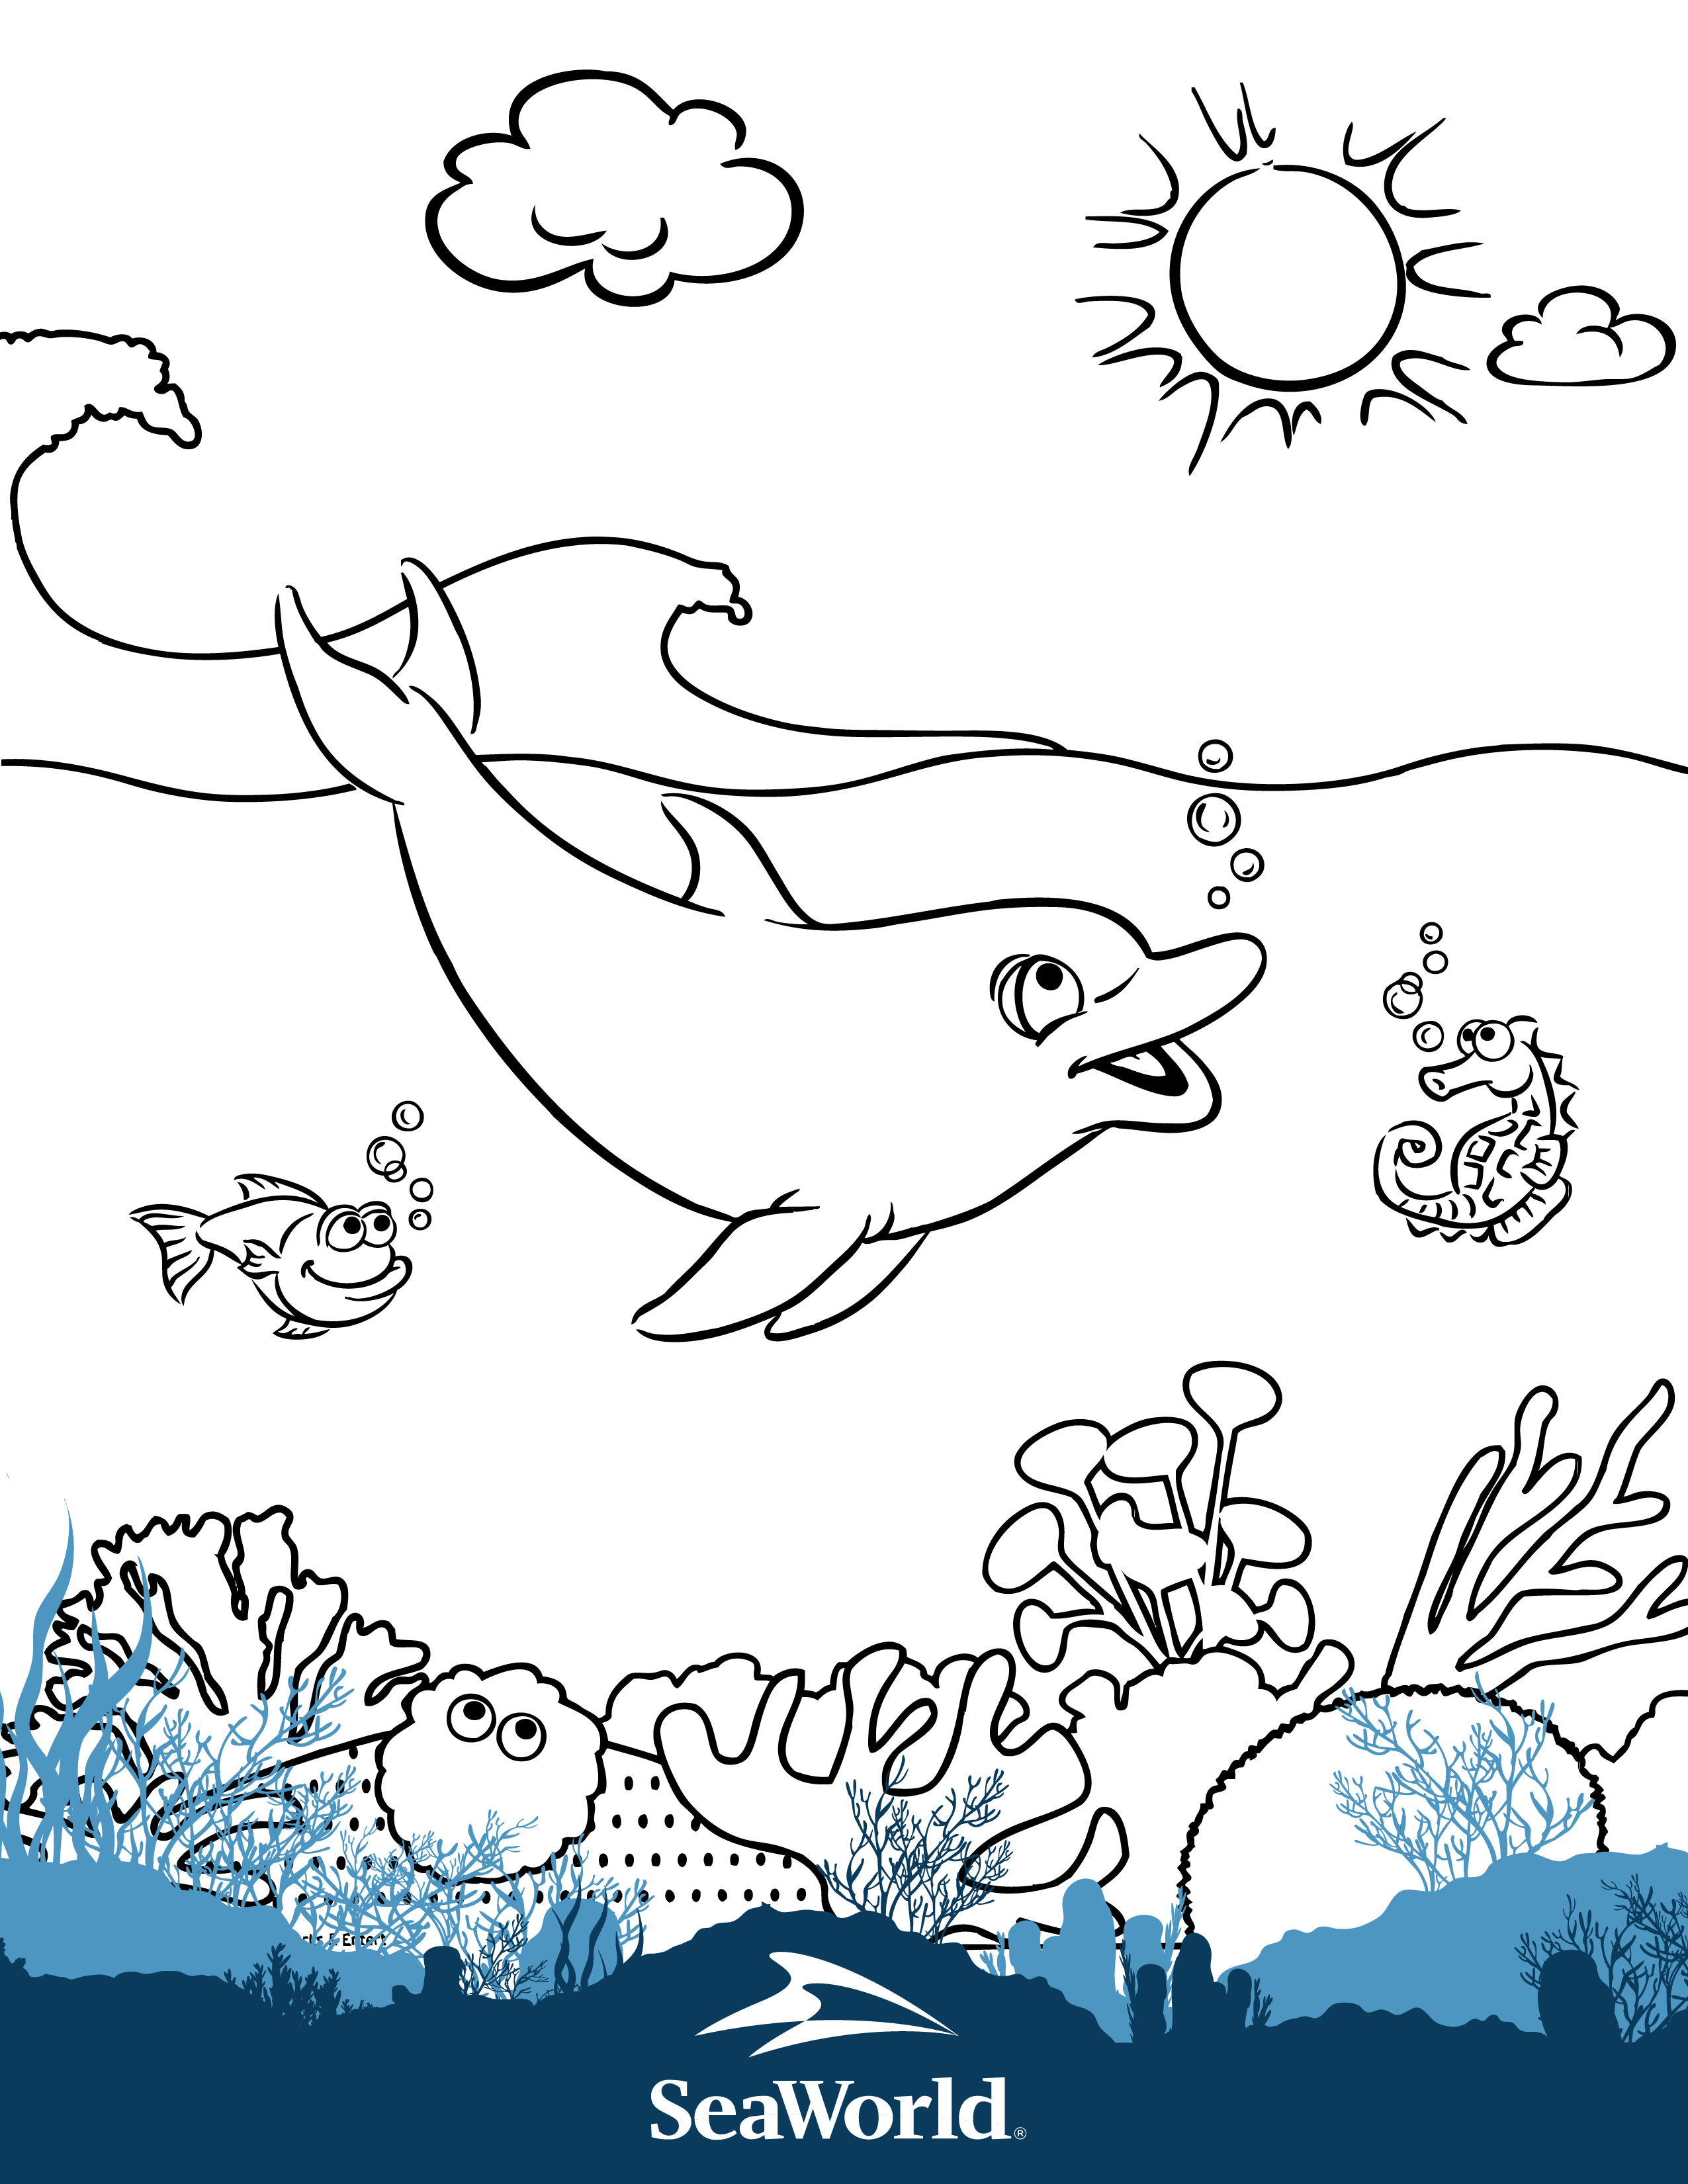 Coloring Pages & Games   SeaWorld